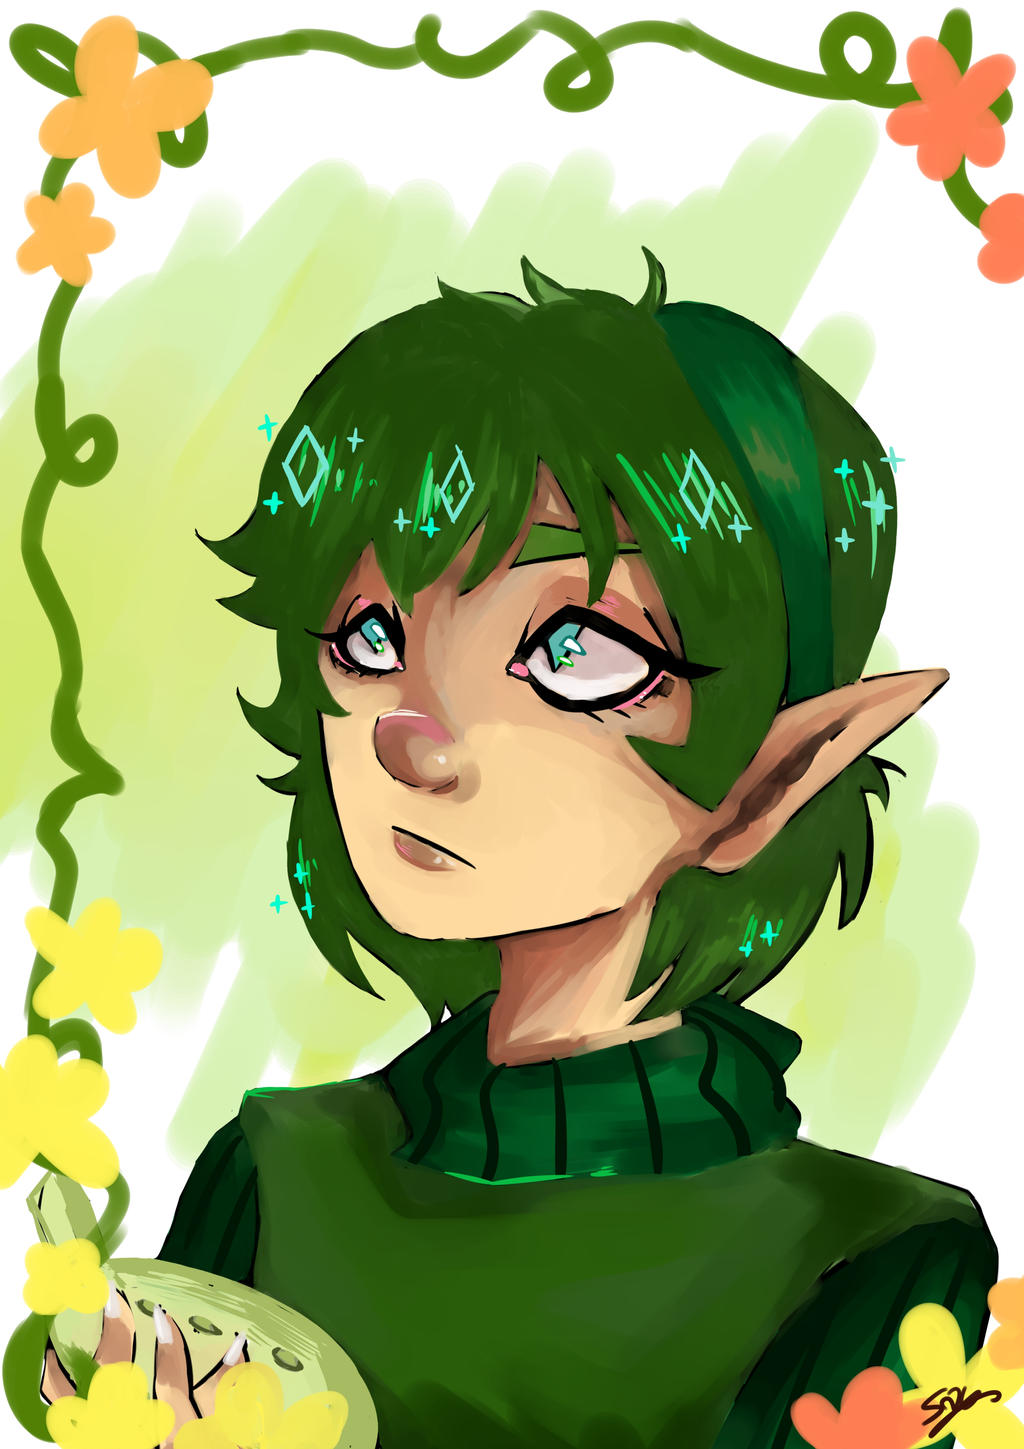 Saria the forest sage